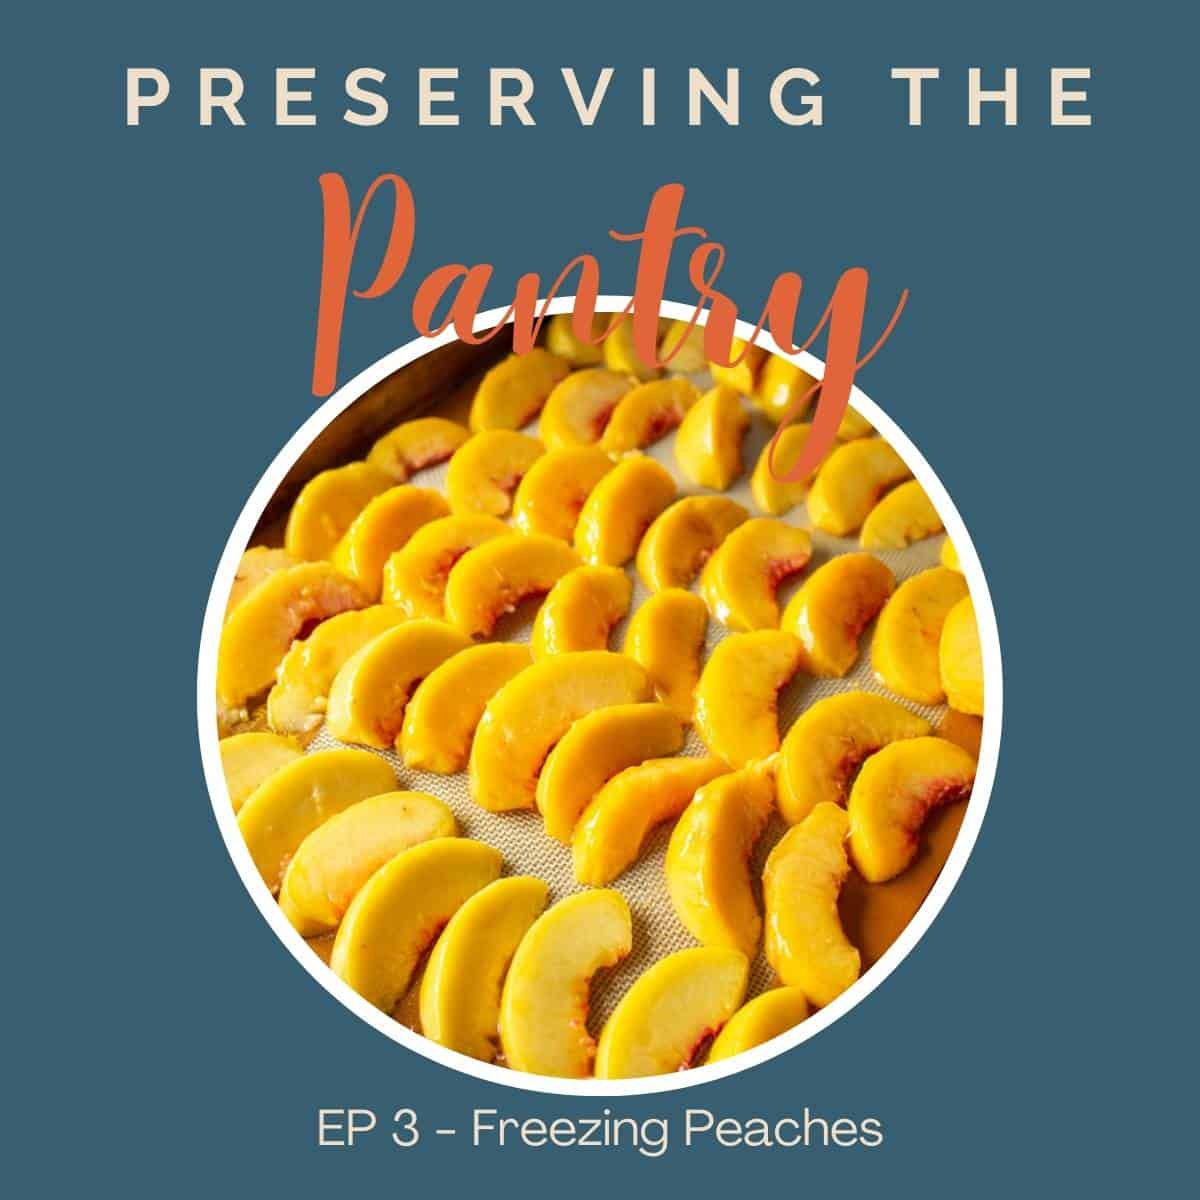 A tray full of sliced peaches.